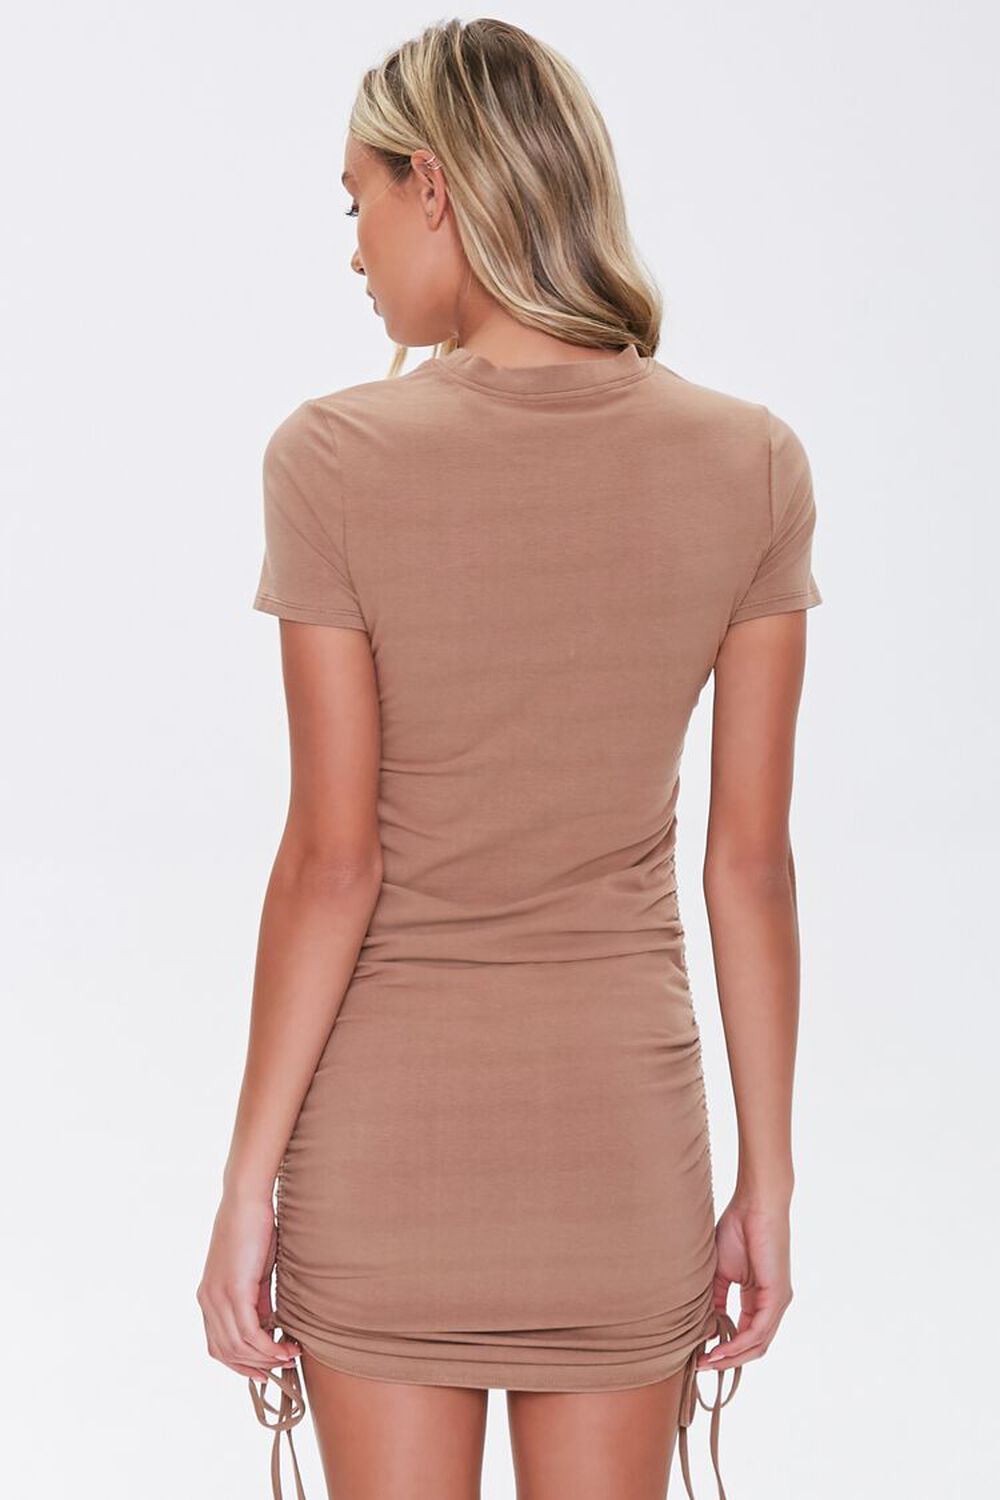 Ruched Bodycon Mini Dress, image 3